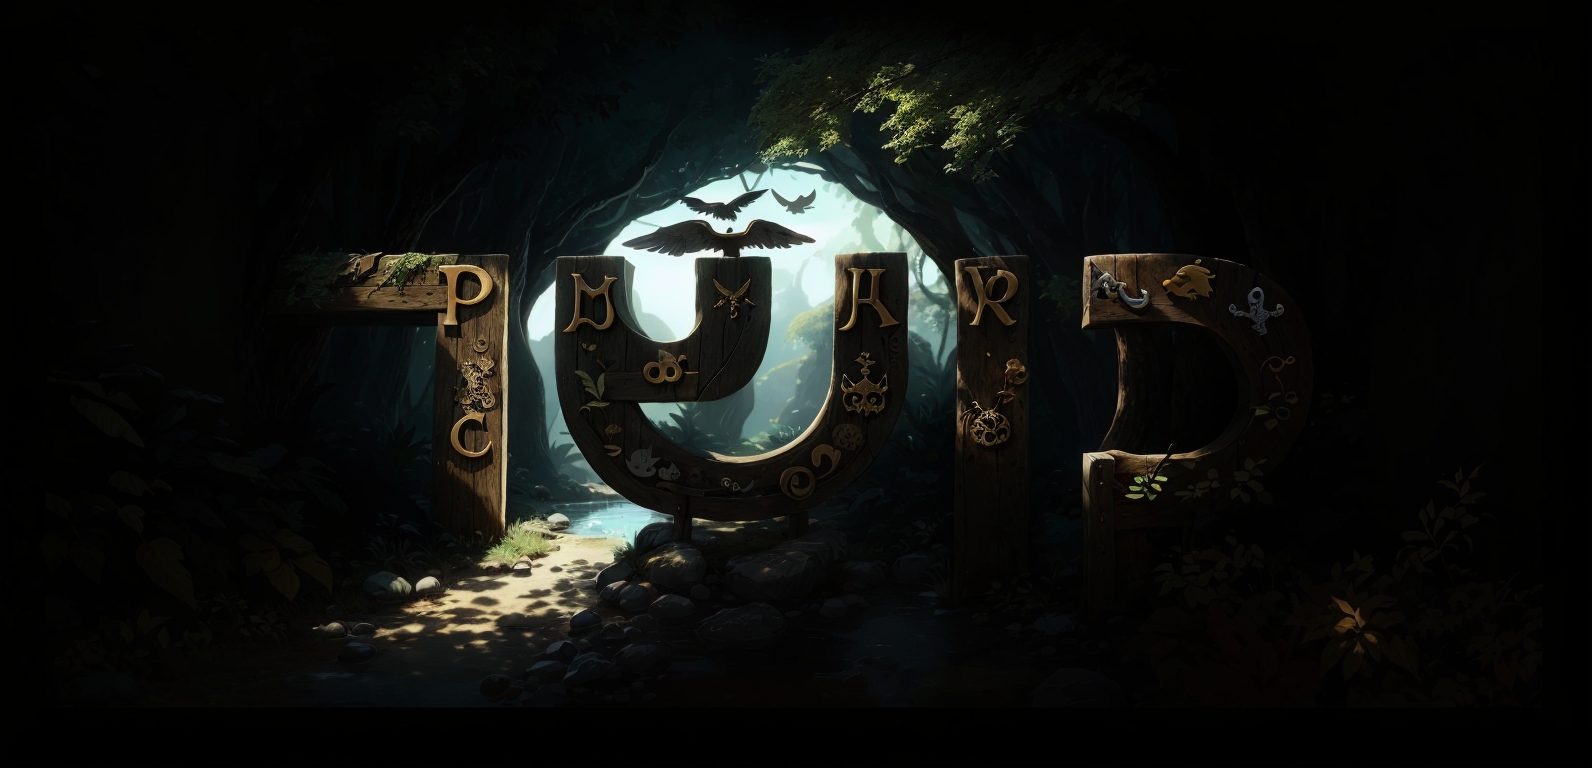 DreamShaper_v7_Stone_letters_in_a_forest_background_with_anima_3.jpg